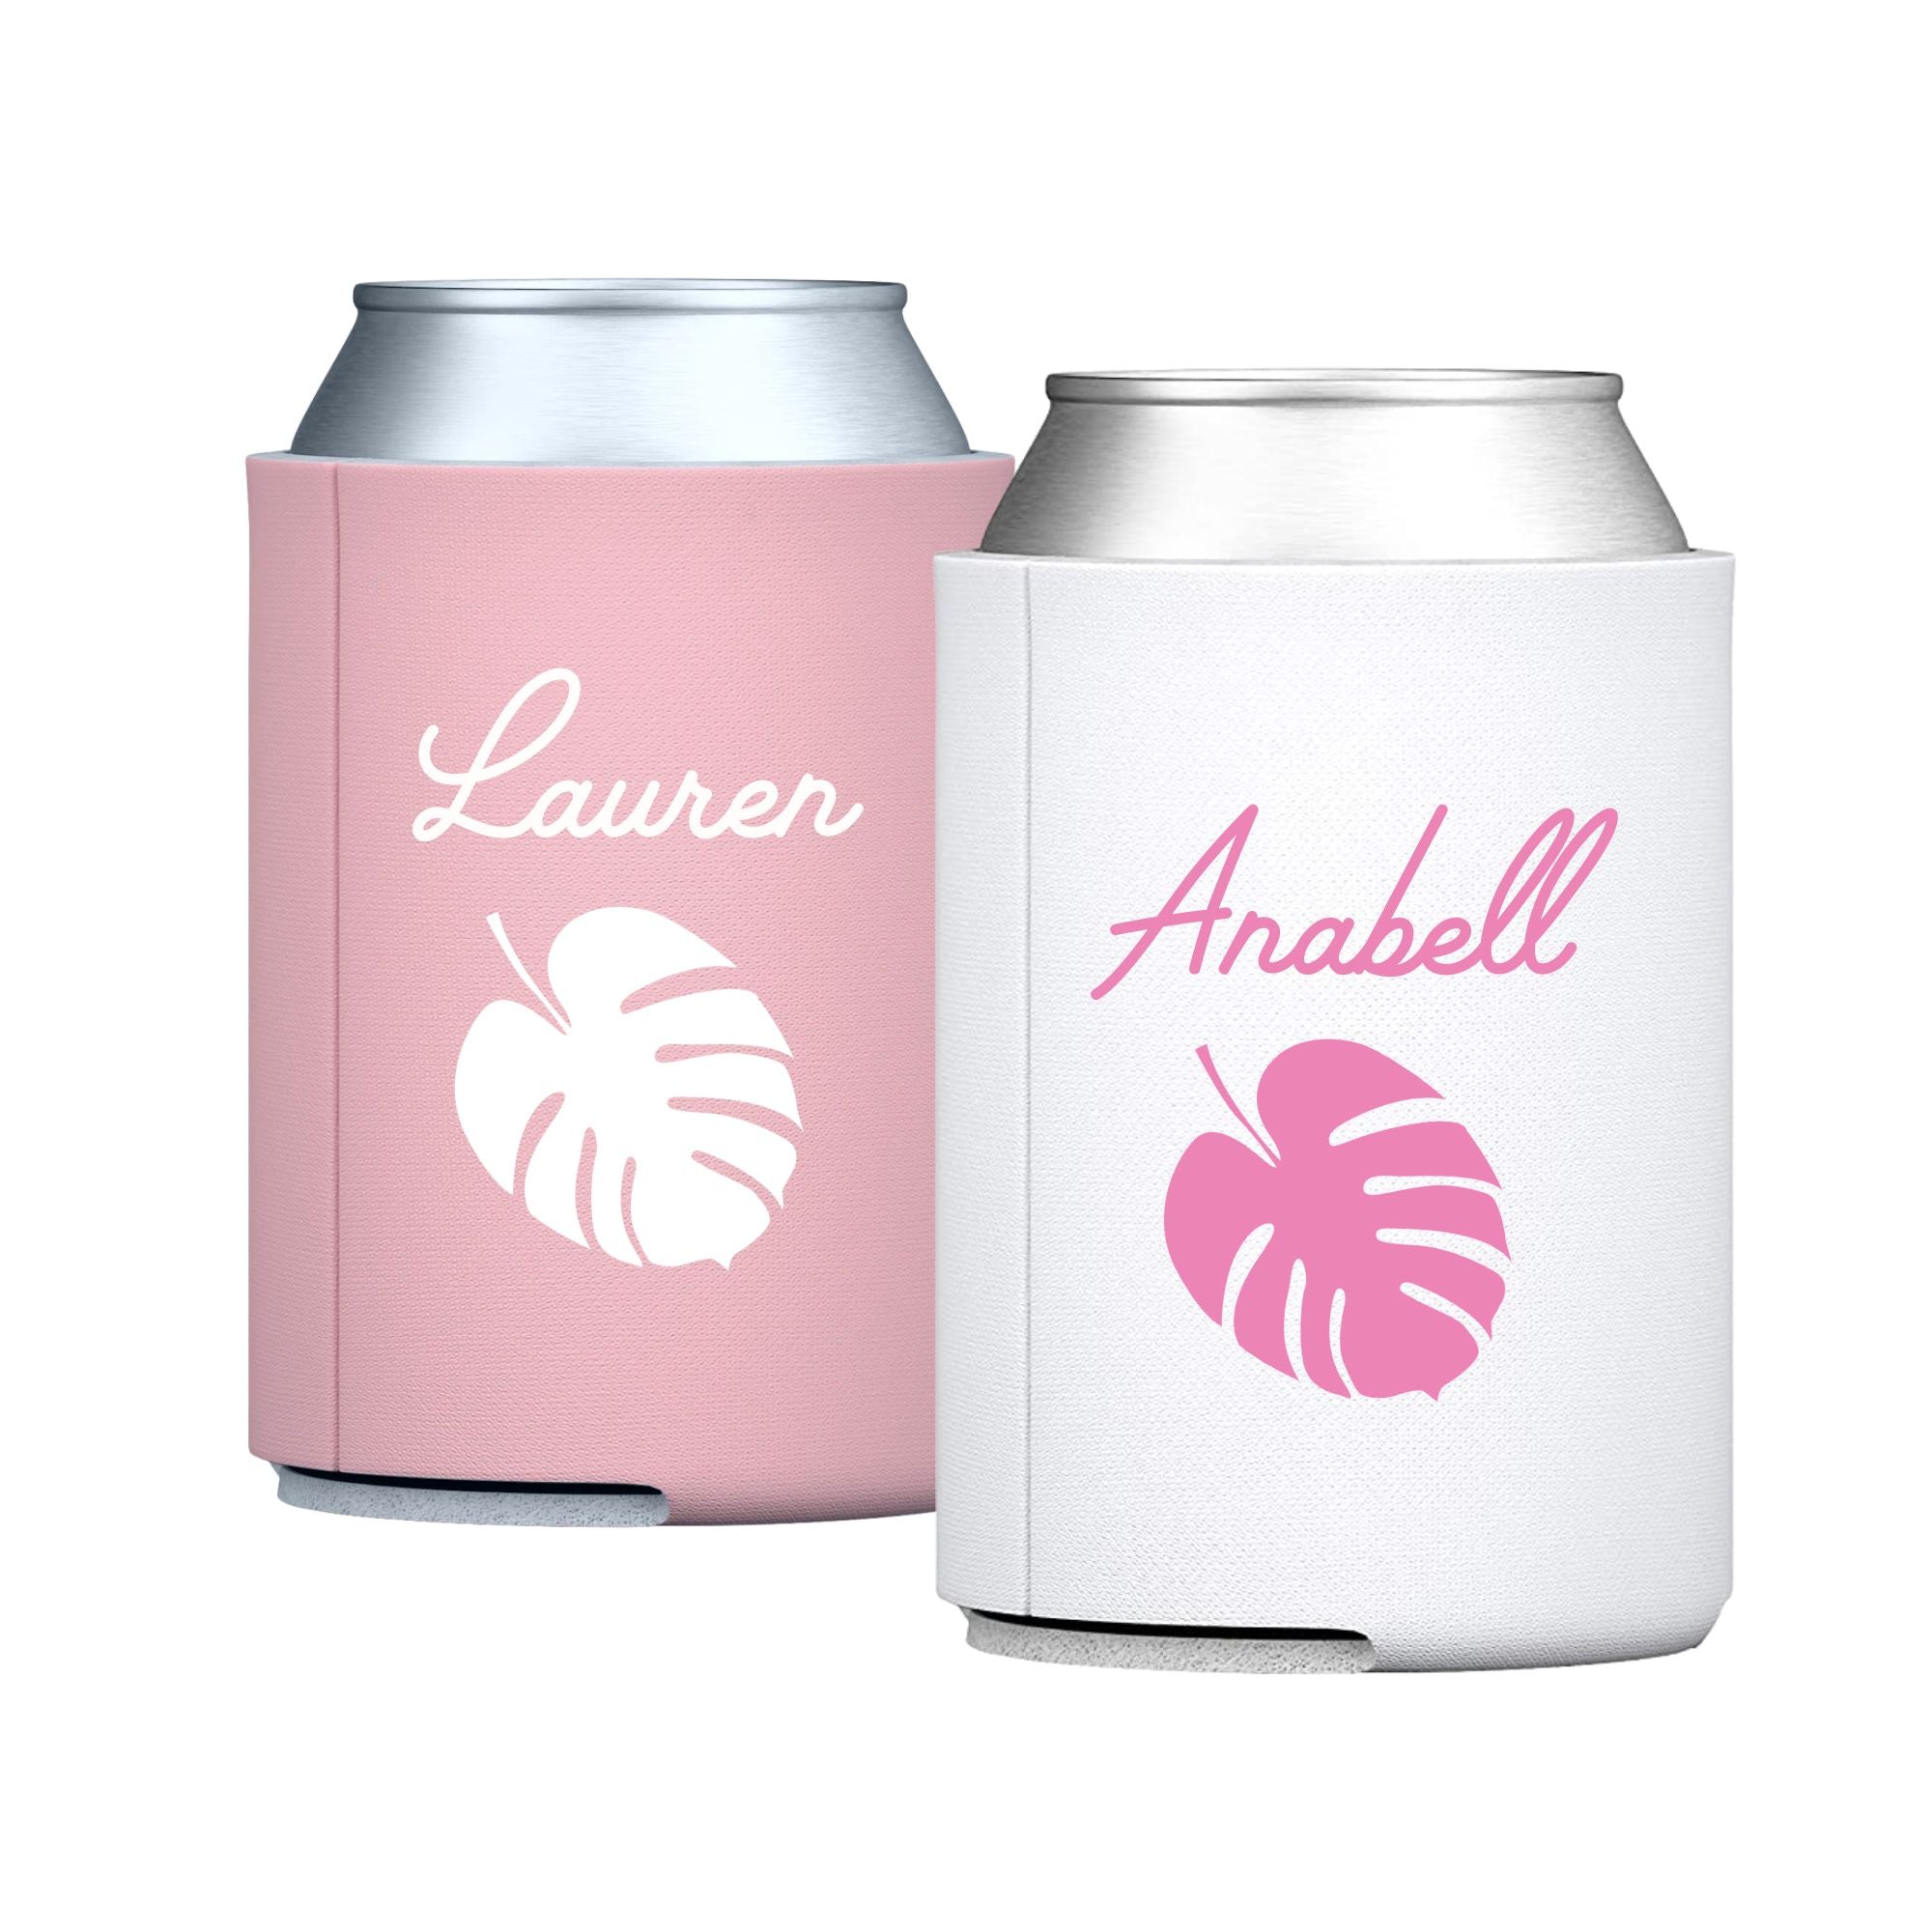 Tropic Like Its Hot Can Cooler - Sprinkled With Pink #bachelorette #custom #gifts